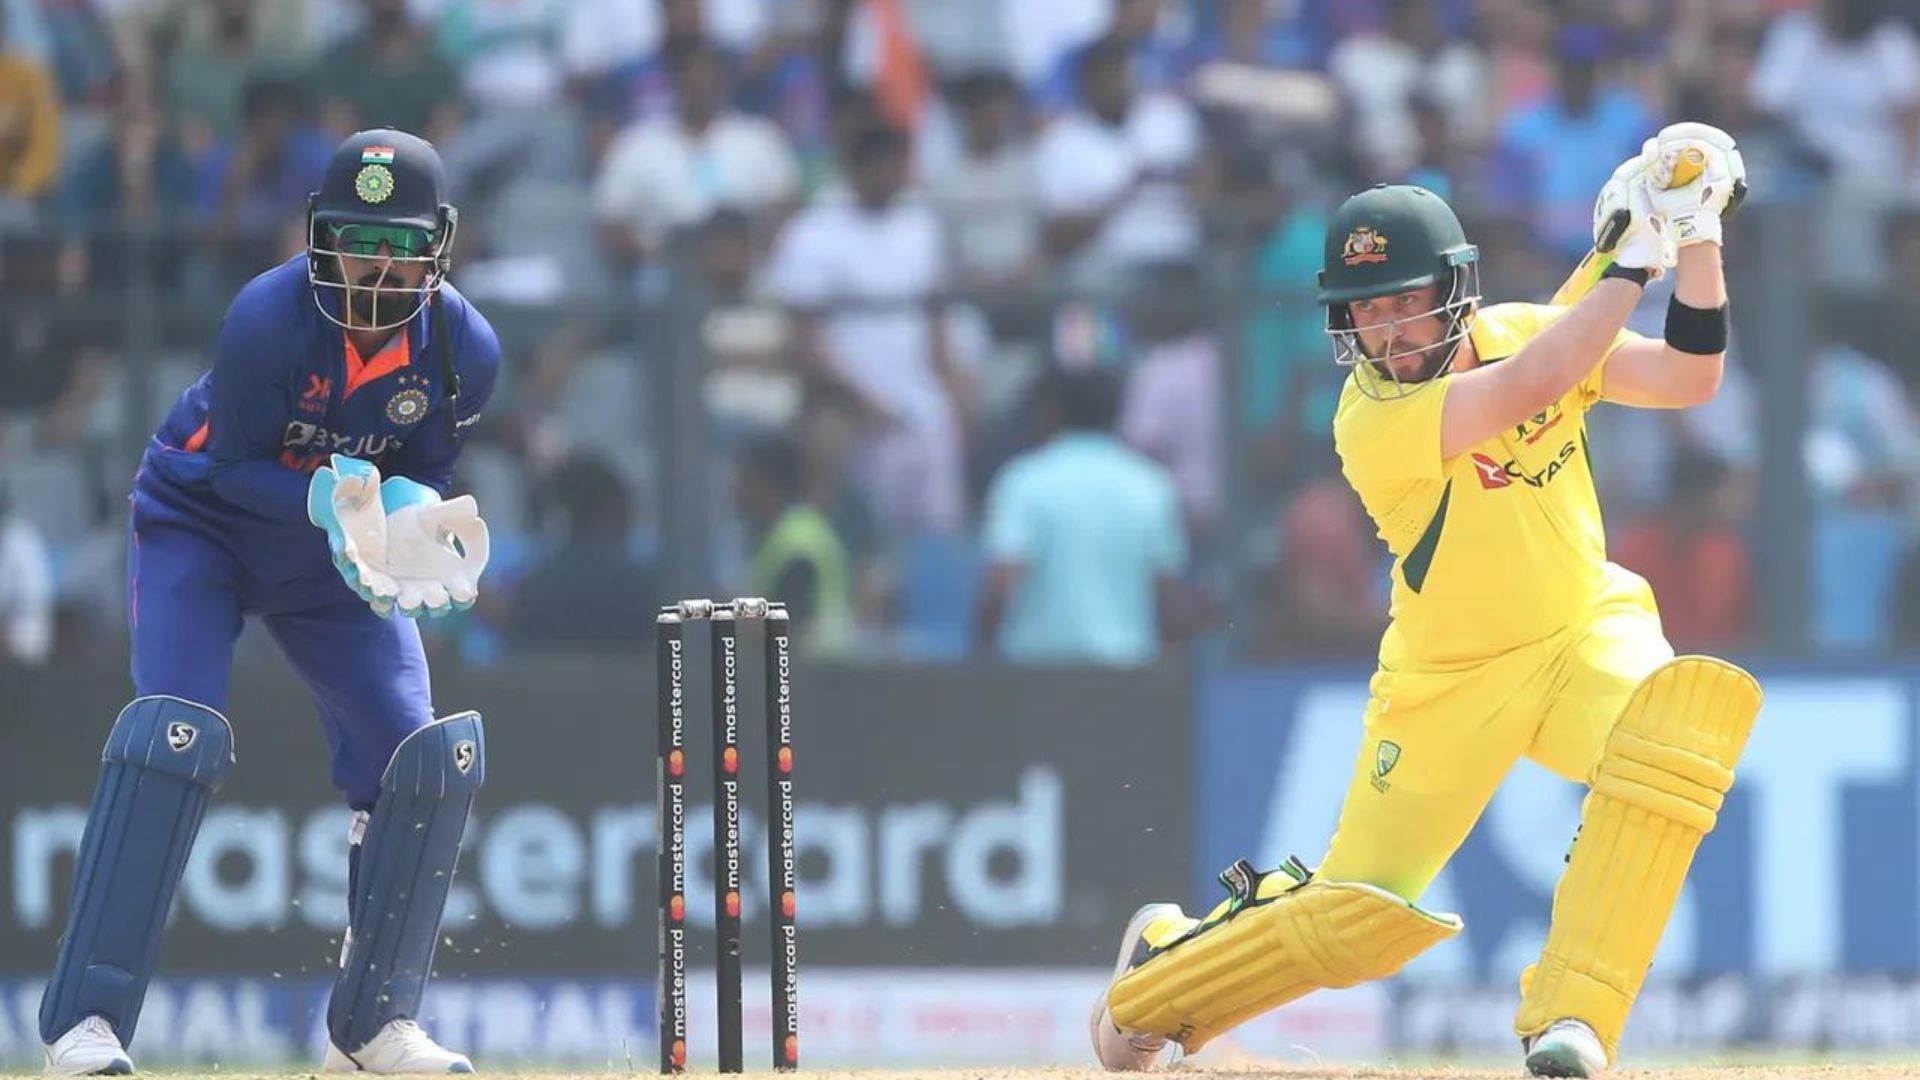 KL Rahul in action as a wicketkeeper in the IND vs AUS 1st ODI (P.C.:BCCI)